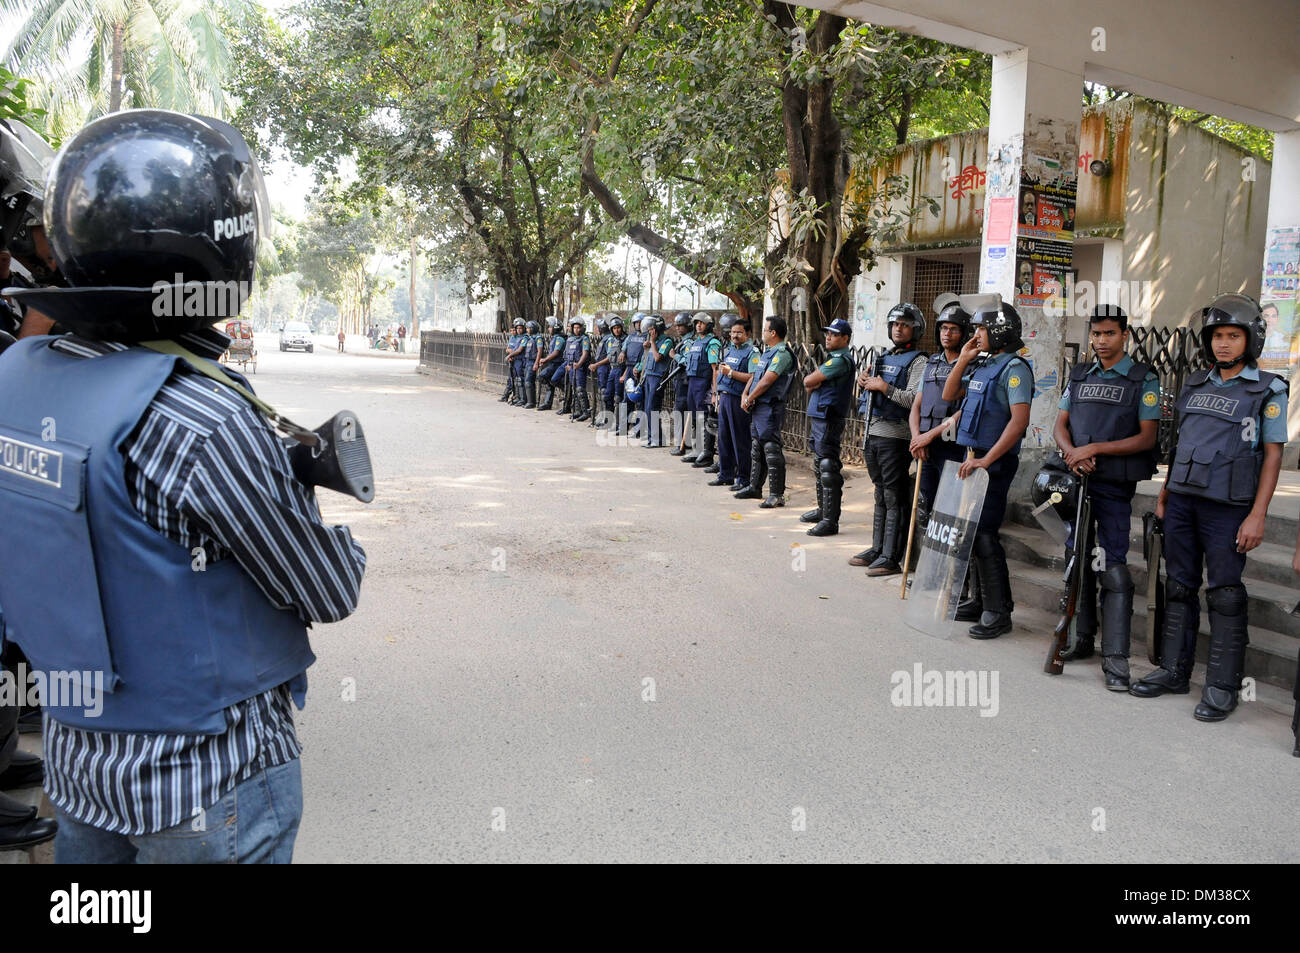 Dhaka, Bangladesh. 11th Dec, 2013. Security officers stand guard in front the Supreme Court during the review petition of convicted war criminal Abdul Quader Mollah in Dhaka, Bangladesh, Dec. 11, 2013. Bangladesh apex court has adjourned till Thursday morning the hearing on the acceptability of the review petition filed by a condemned war criminal who was all set to be executed until a dramatic last gasp intervention saved him from the gallows late on Tuesday. Credit:  Shariful Islam/Xinhua/Alamy Live News Stock Photo